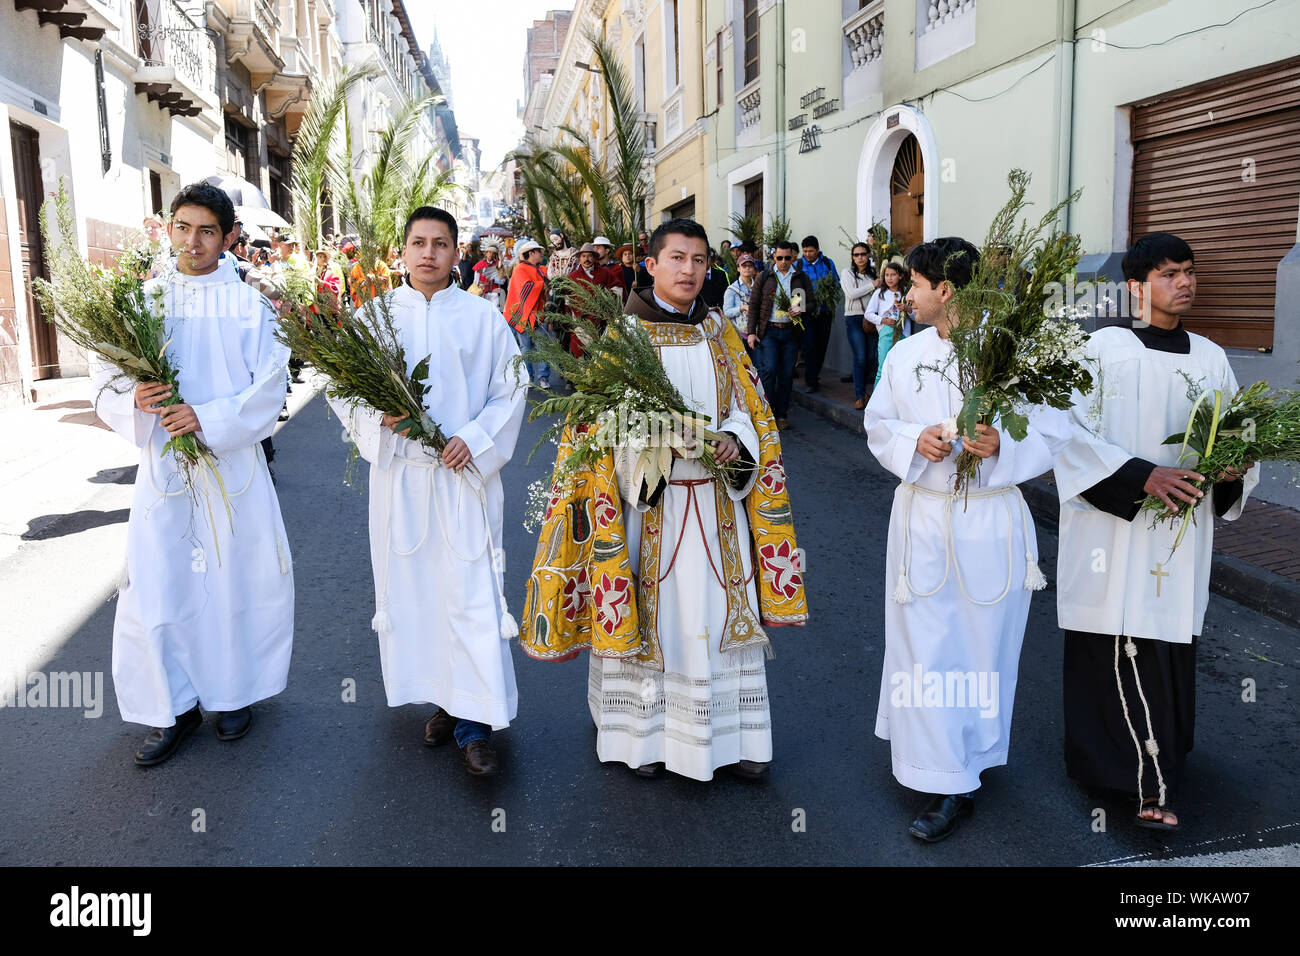 Residents of Quito in Ecuador carry bouquets of leaves and plants as they march through the city's historic centre on the morning of Palm Sunday. The Stock Photo